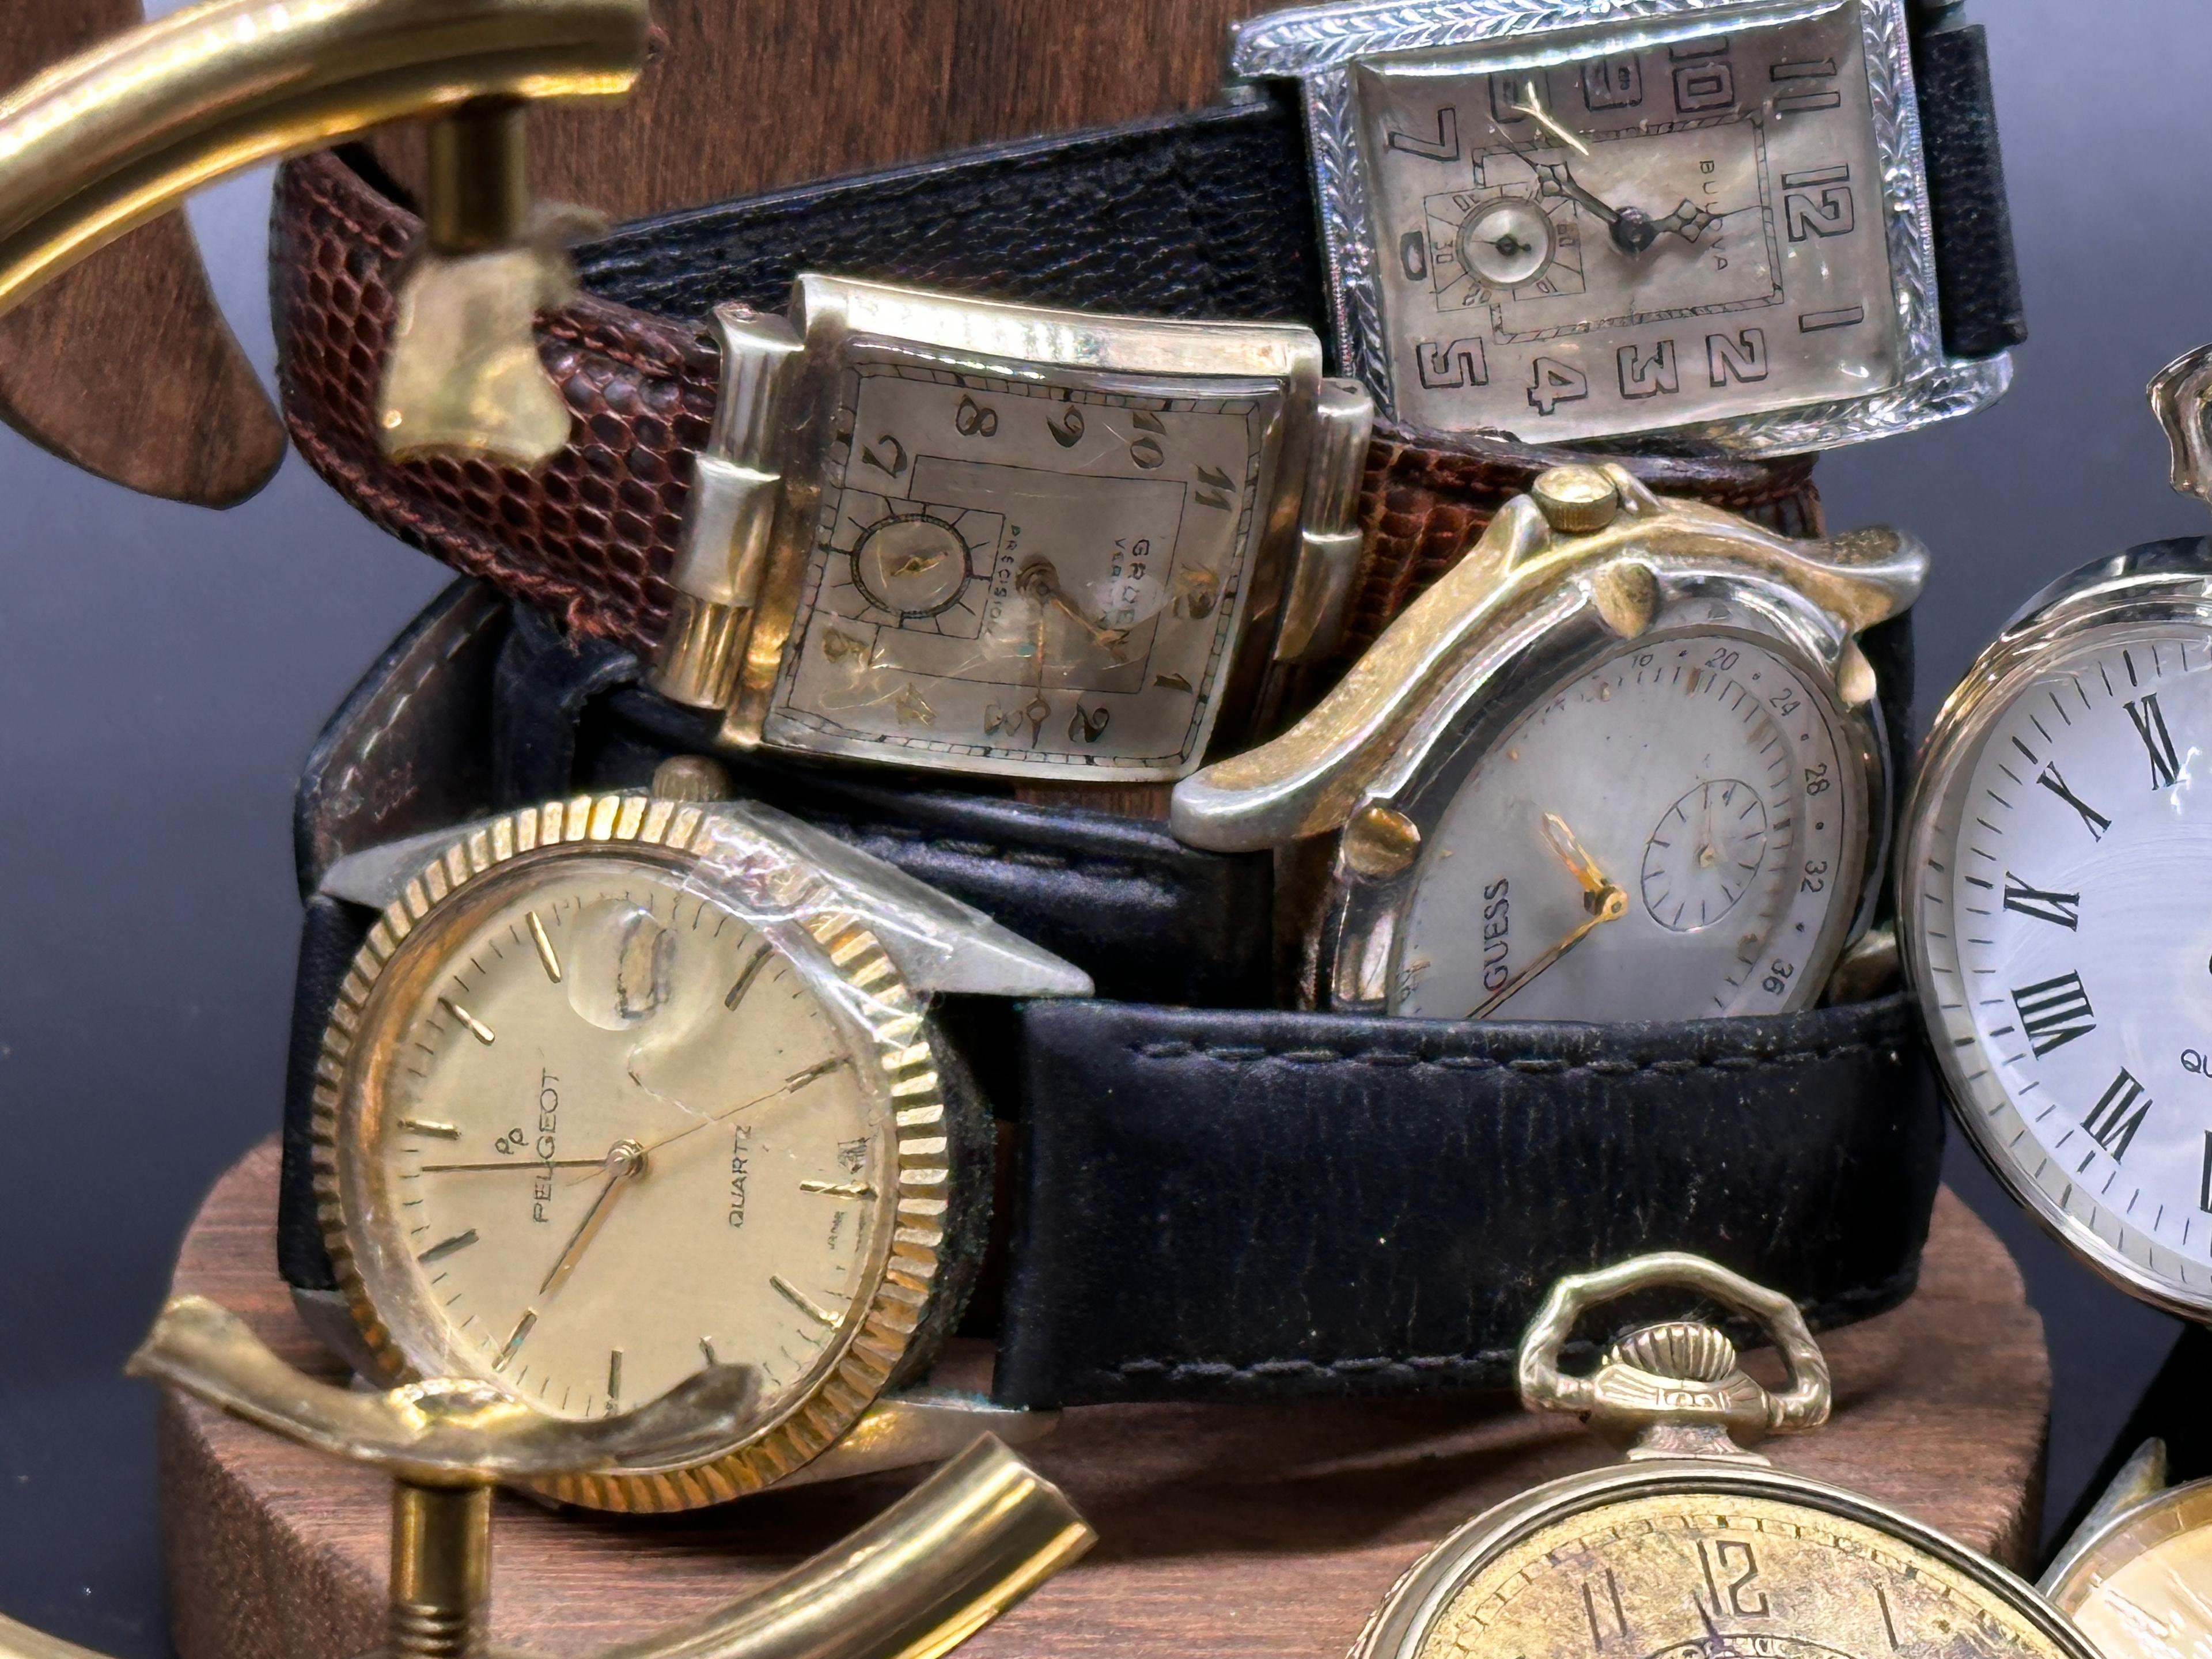 Assortment of Vintage/Antique Men's Wrist Watches, Pocket Watches and More